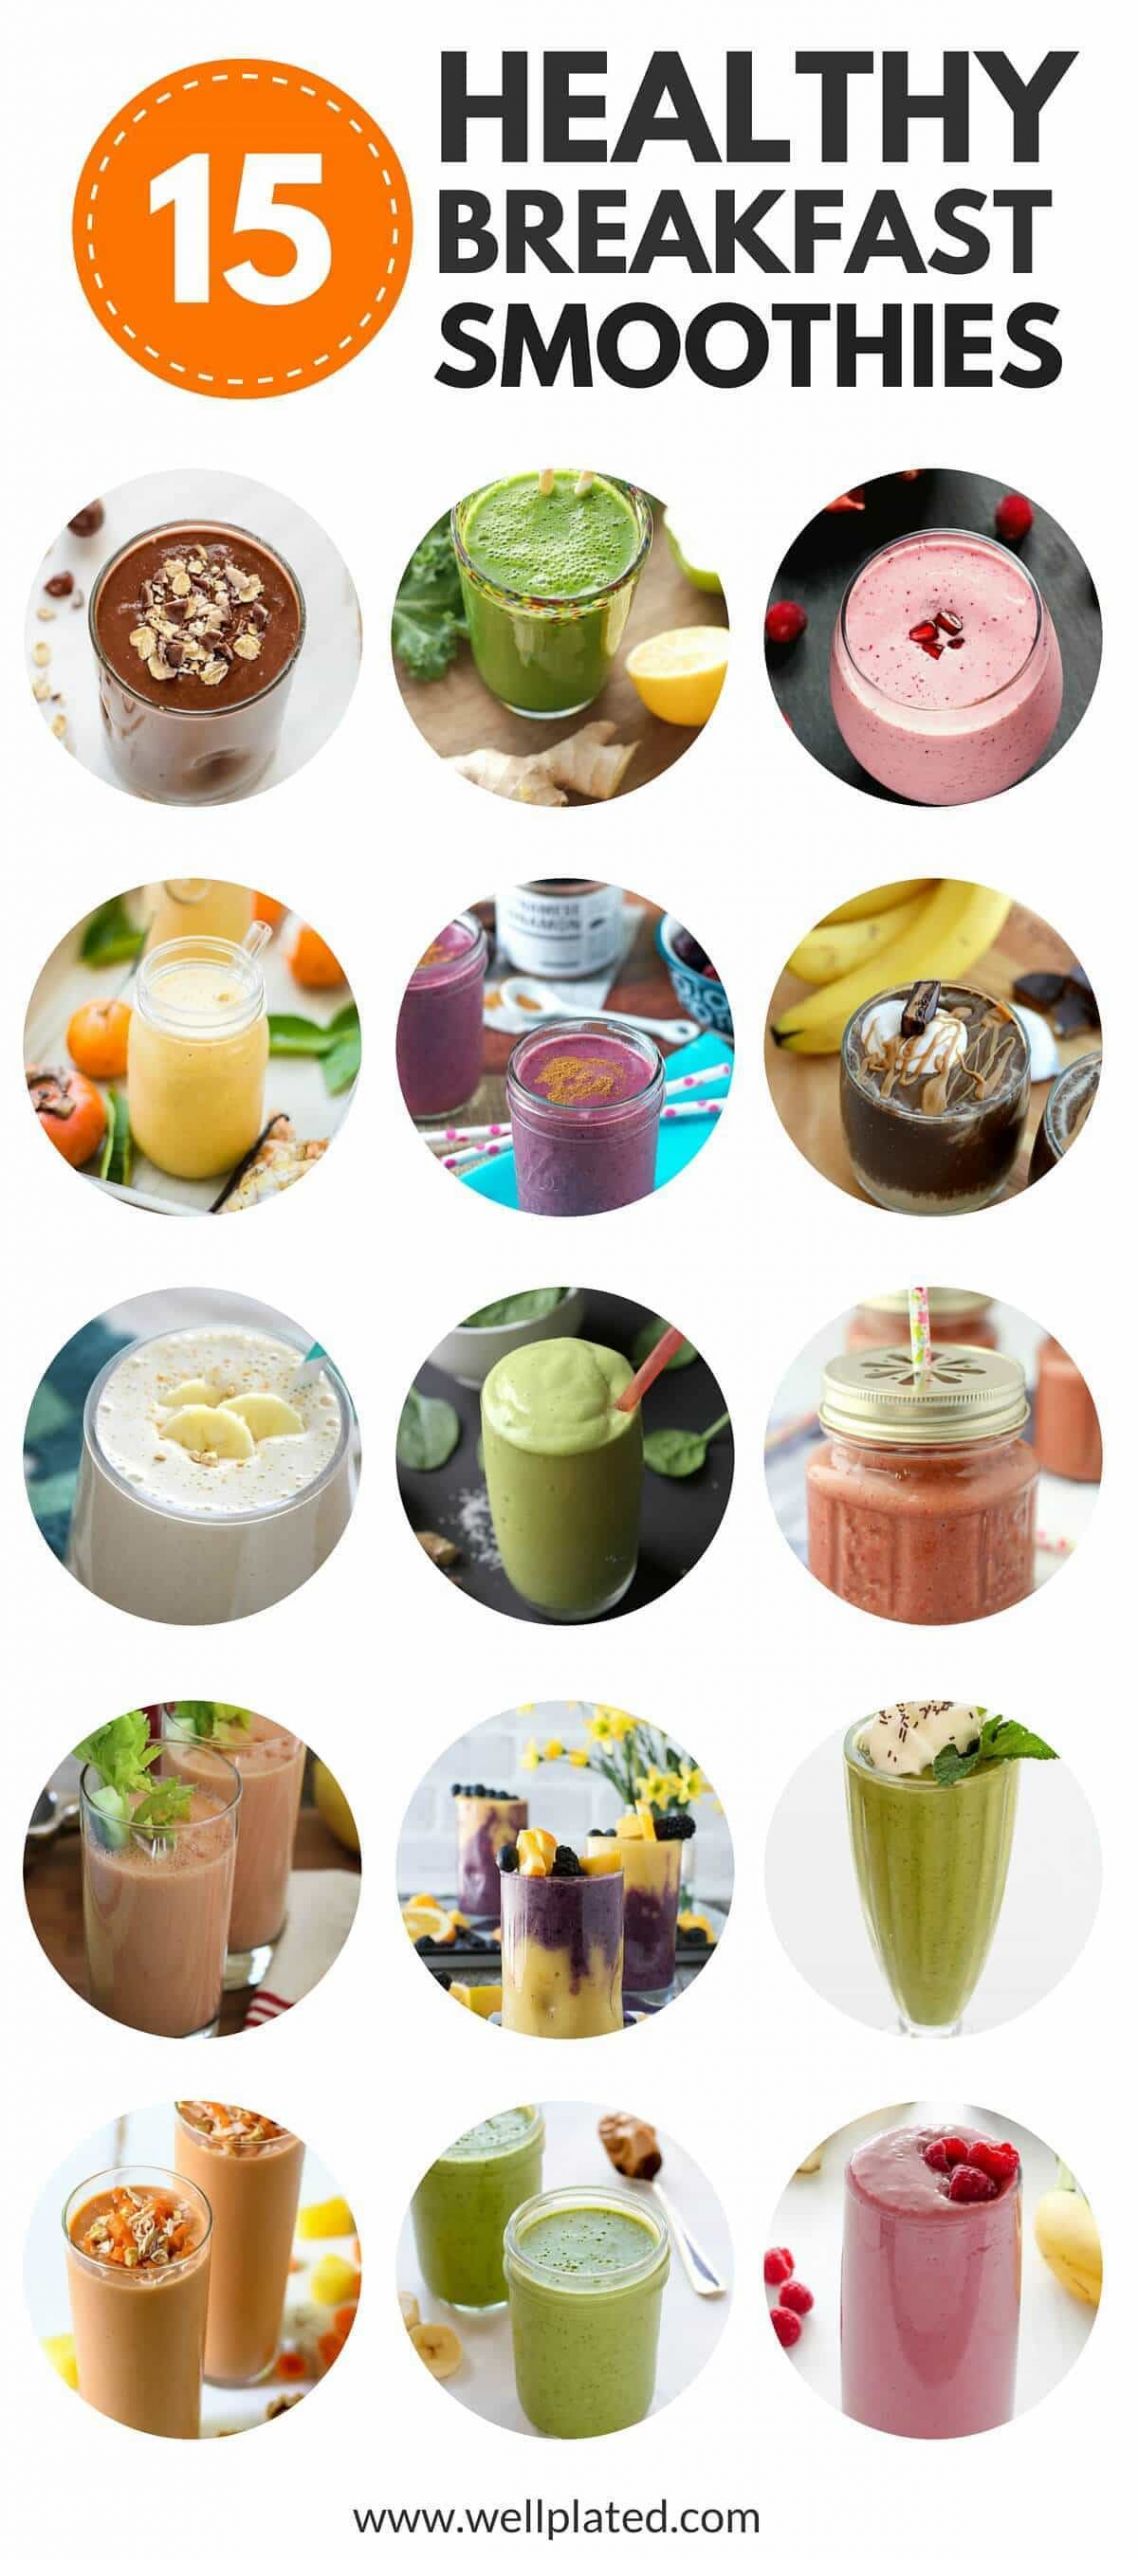 Breakfast Smoothie Recipes
 The Best 15 Healthy Breakfast Smoothies